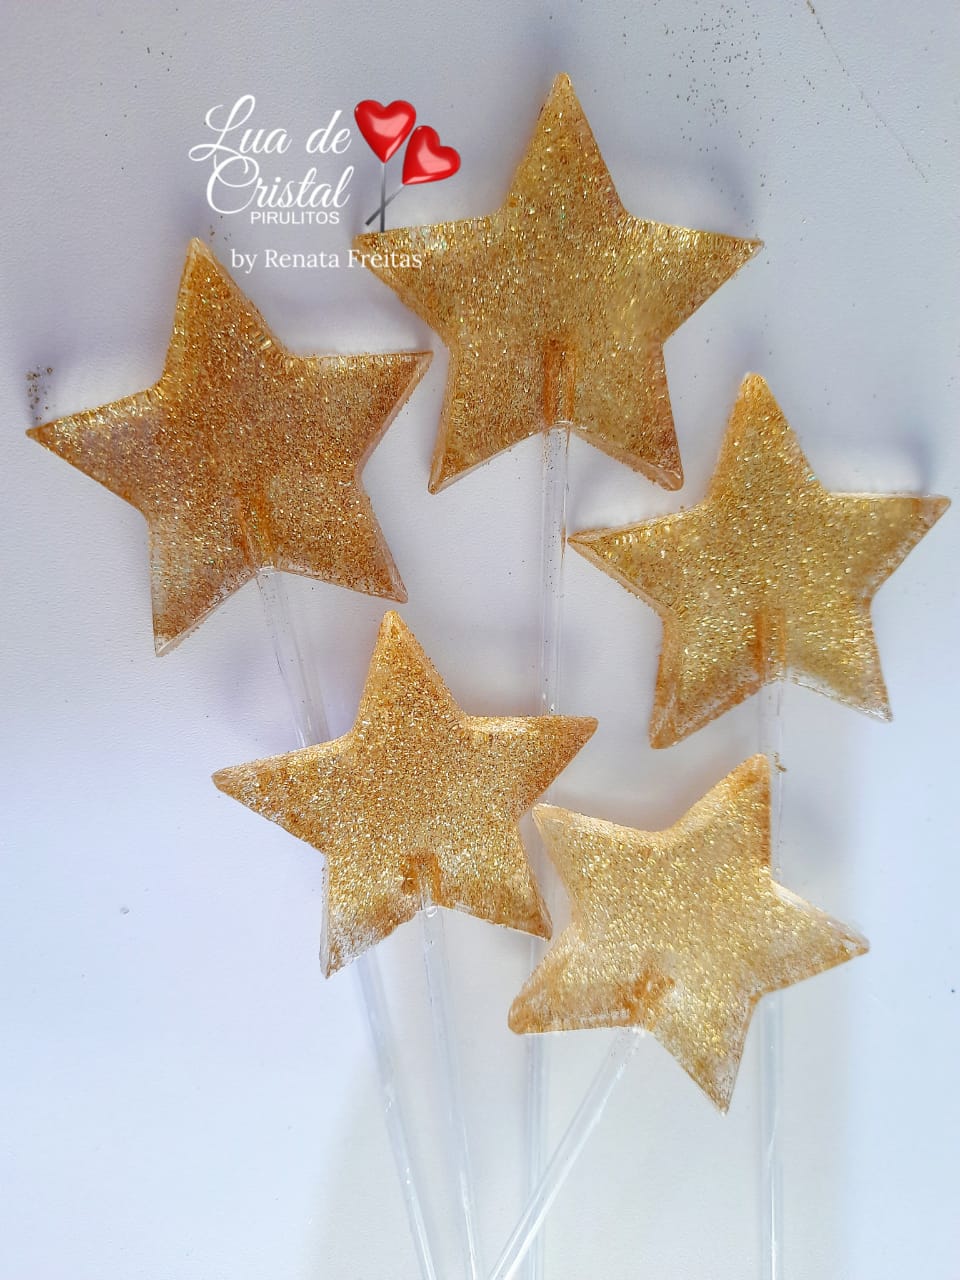 Star Silicone Mold For Candy or Chocolate 